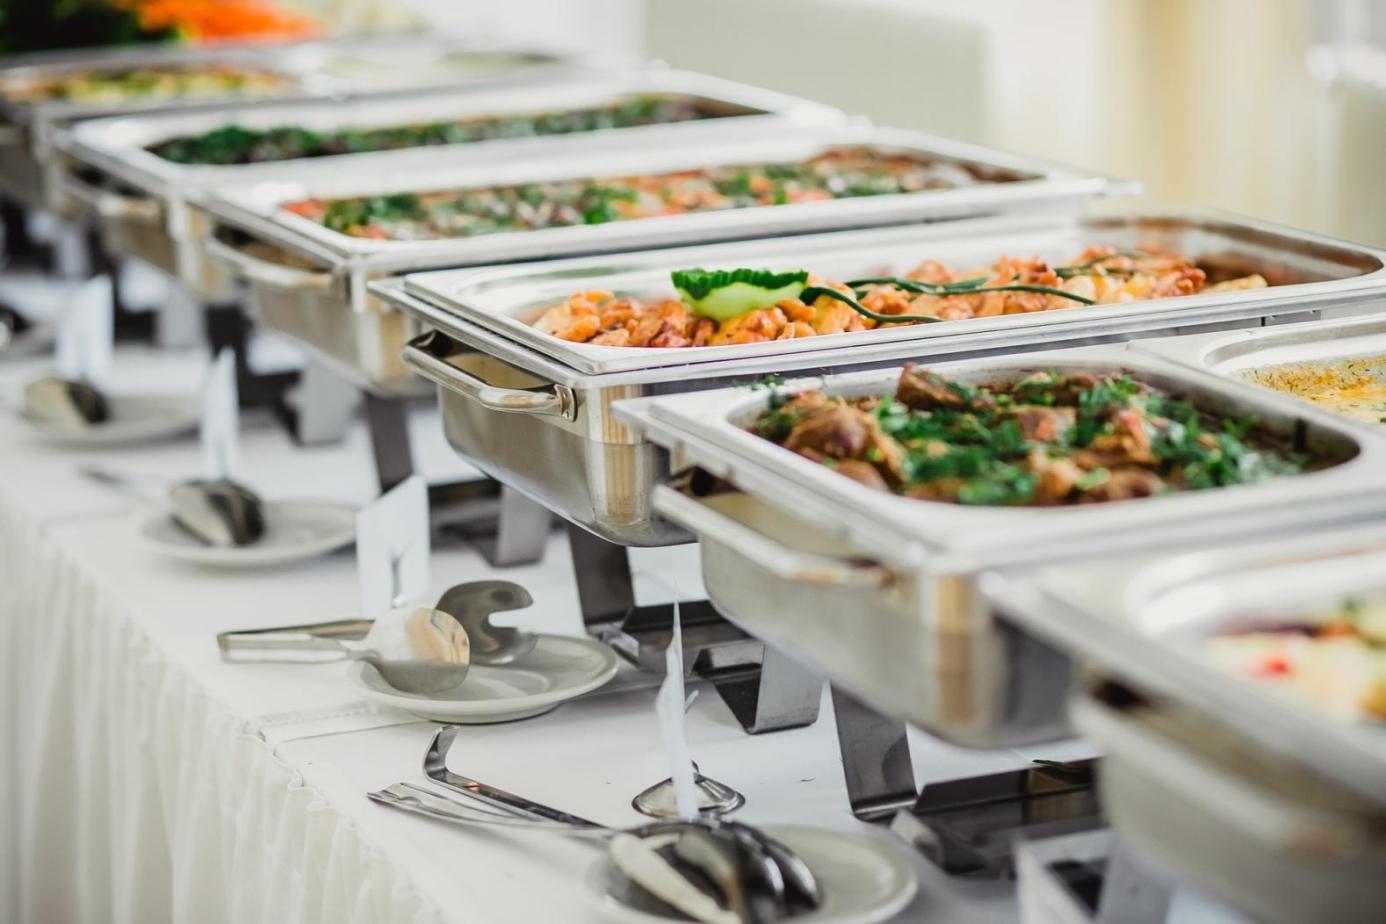 What Are The Different Types Of Catering Services?